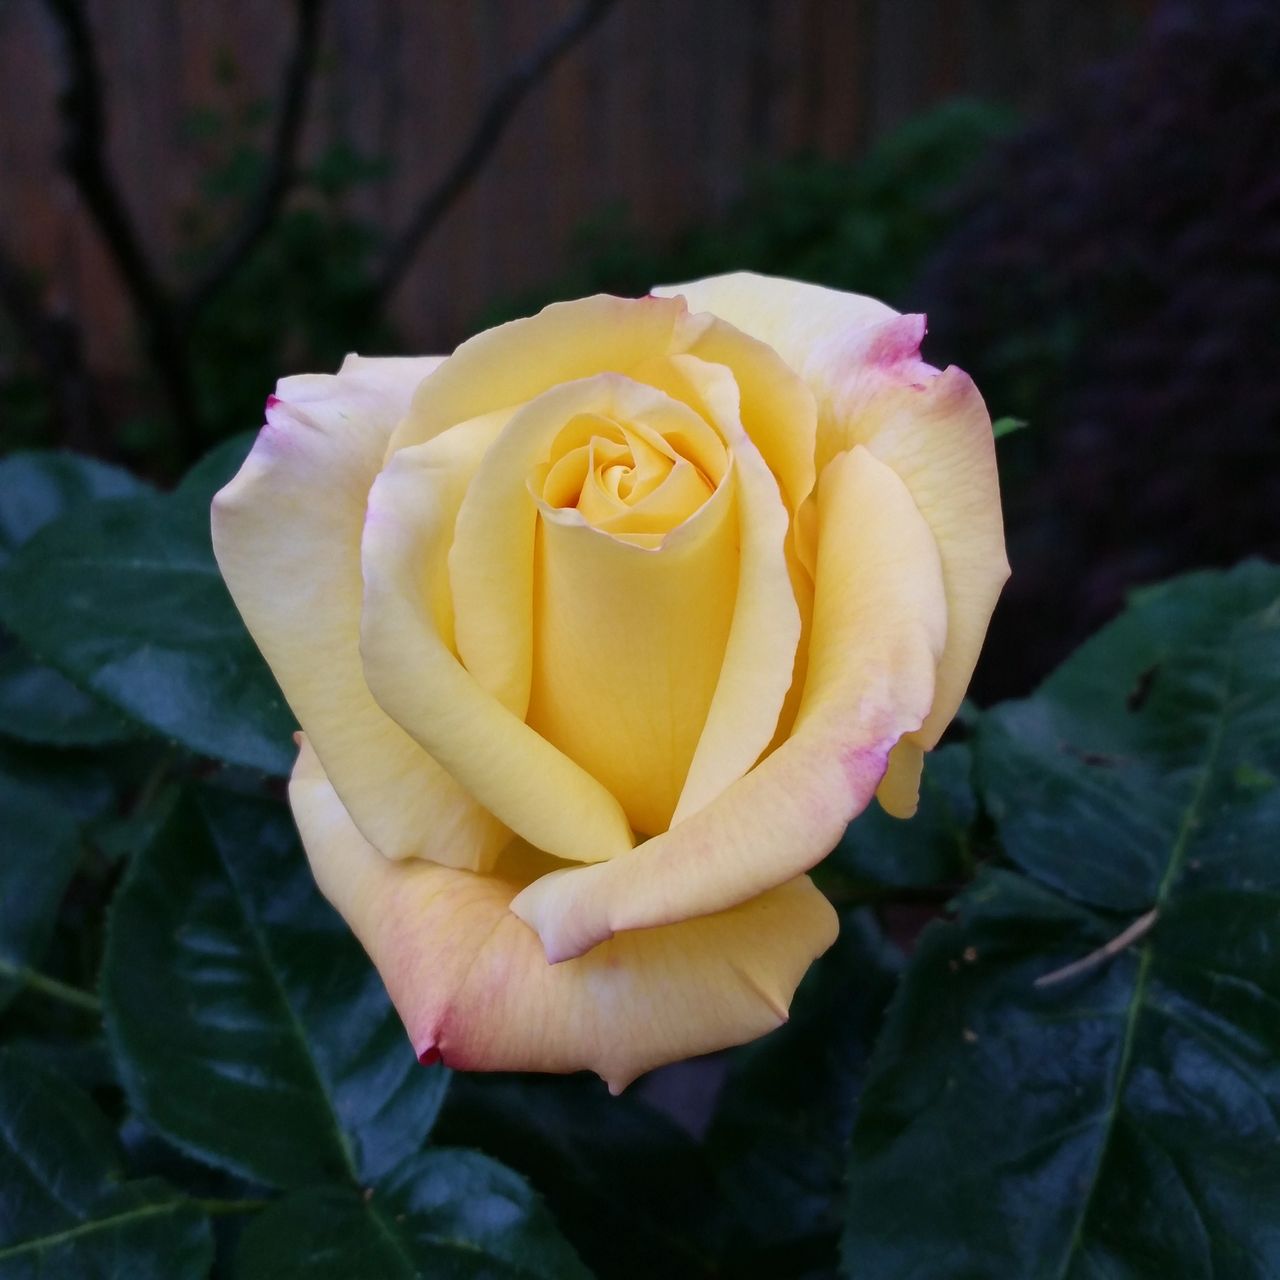 yellow rosebud with dark green leaves in background